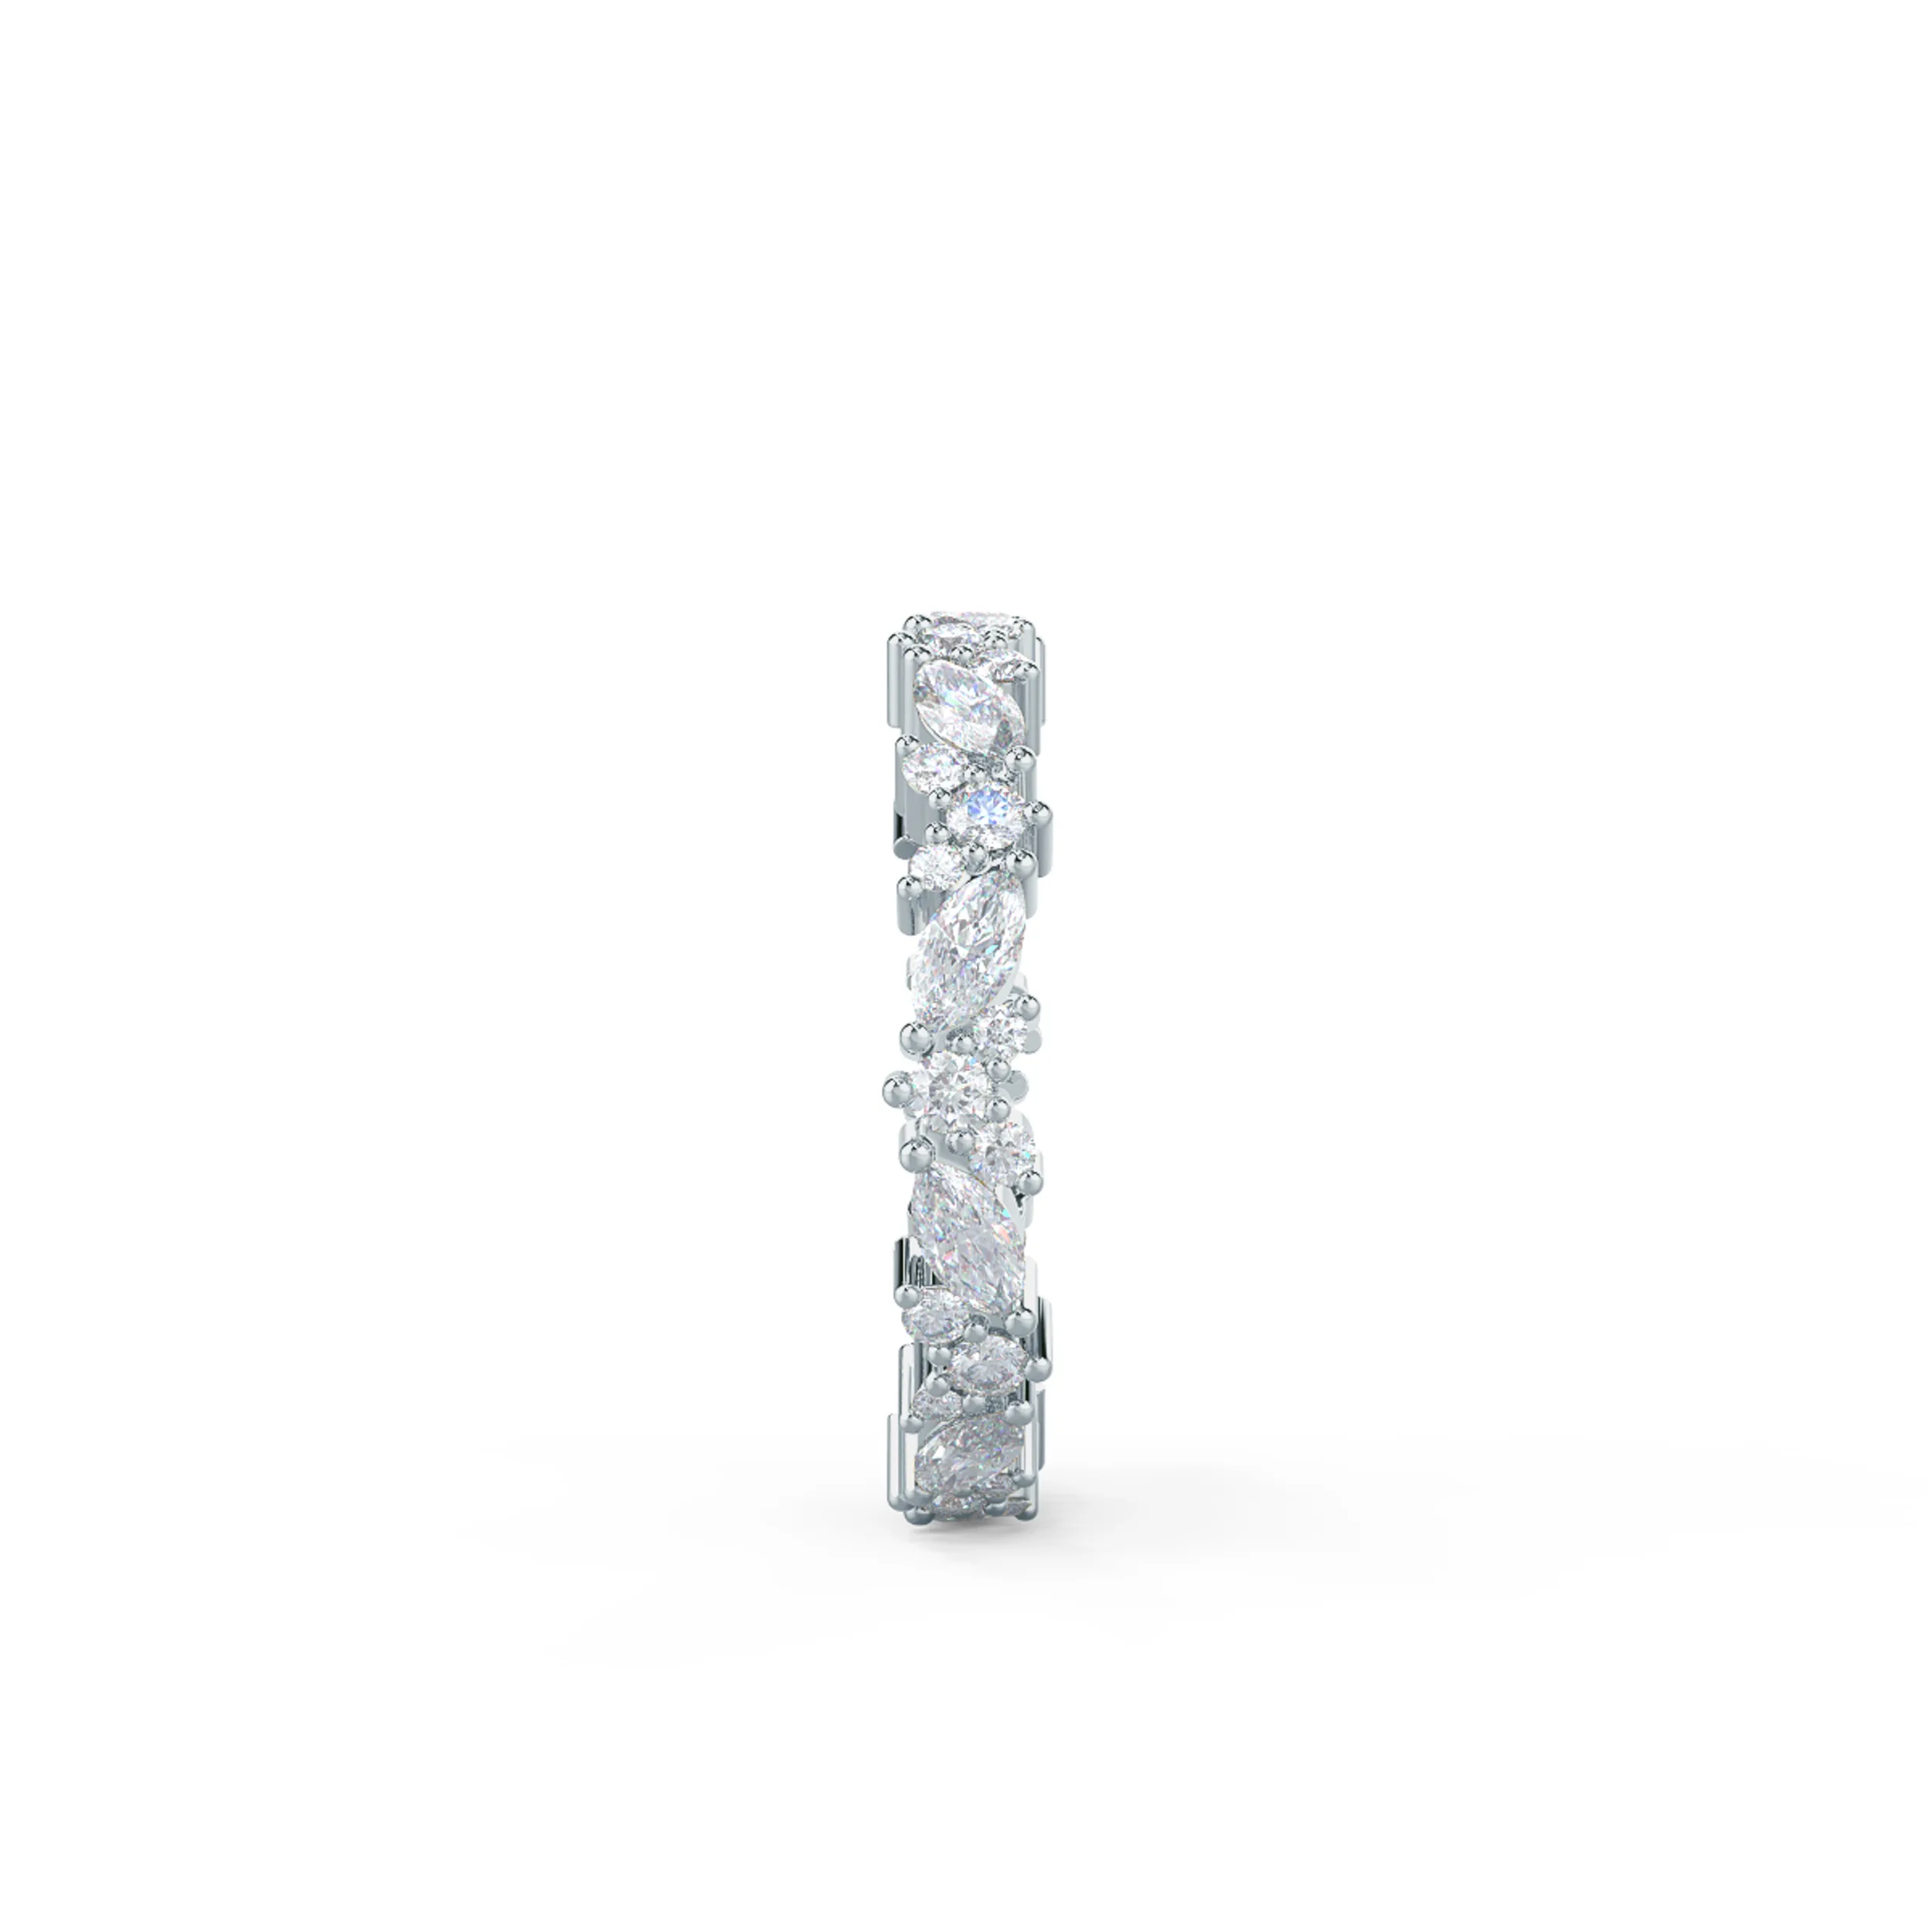 18k White Gold Jessica Eternity Band featuring High Quality 1.35 ctw Lab Diamonds (Side View)